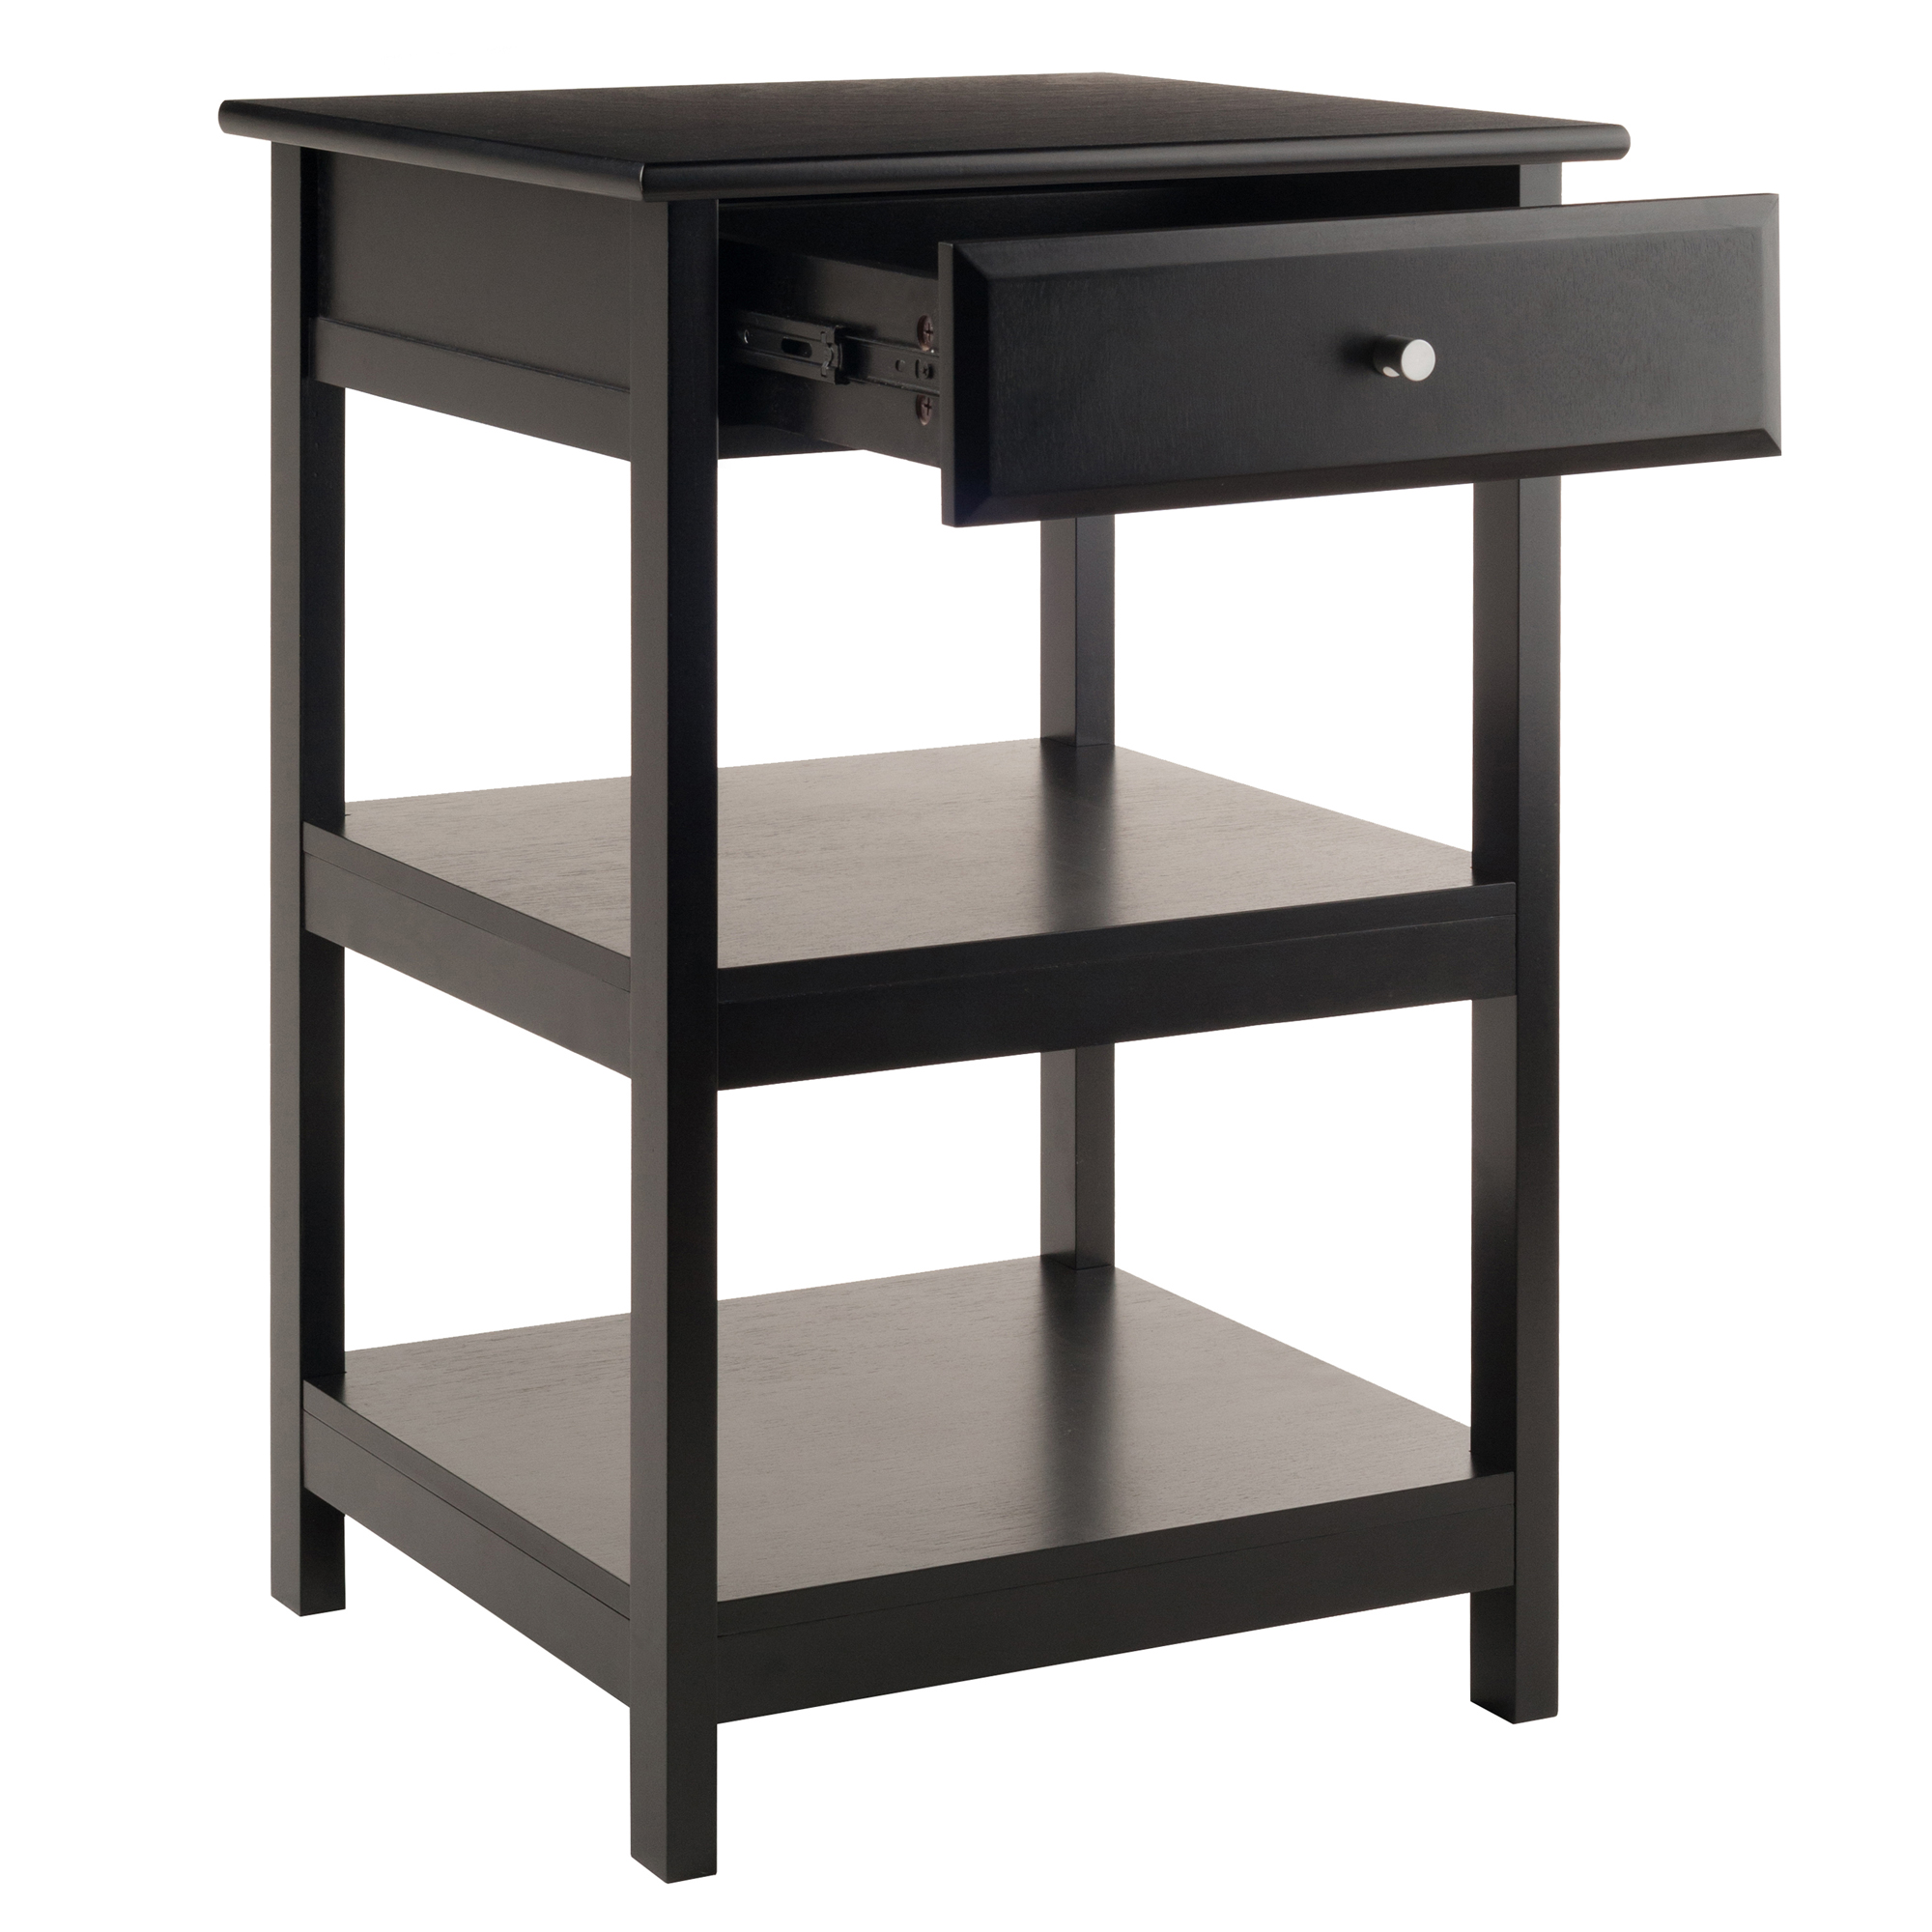 Delta Home Office Printer Stand - image 2 of 3